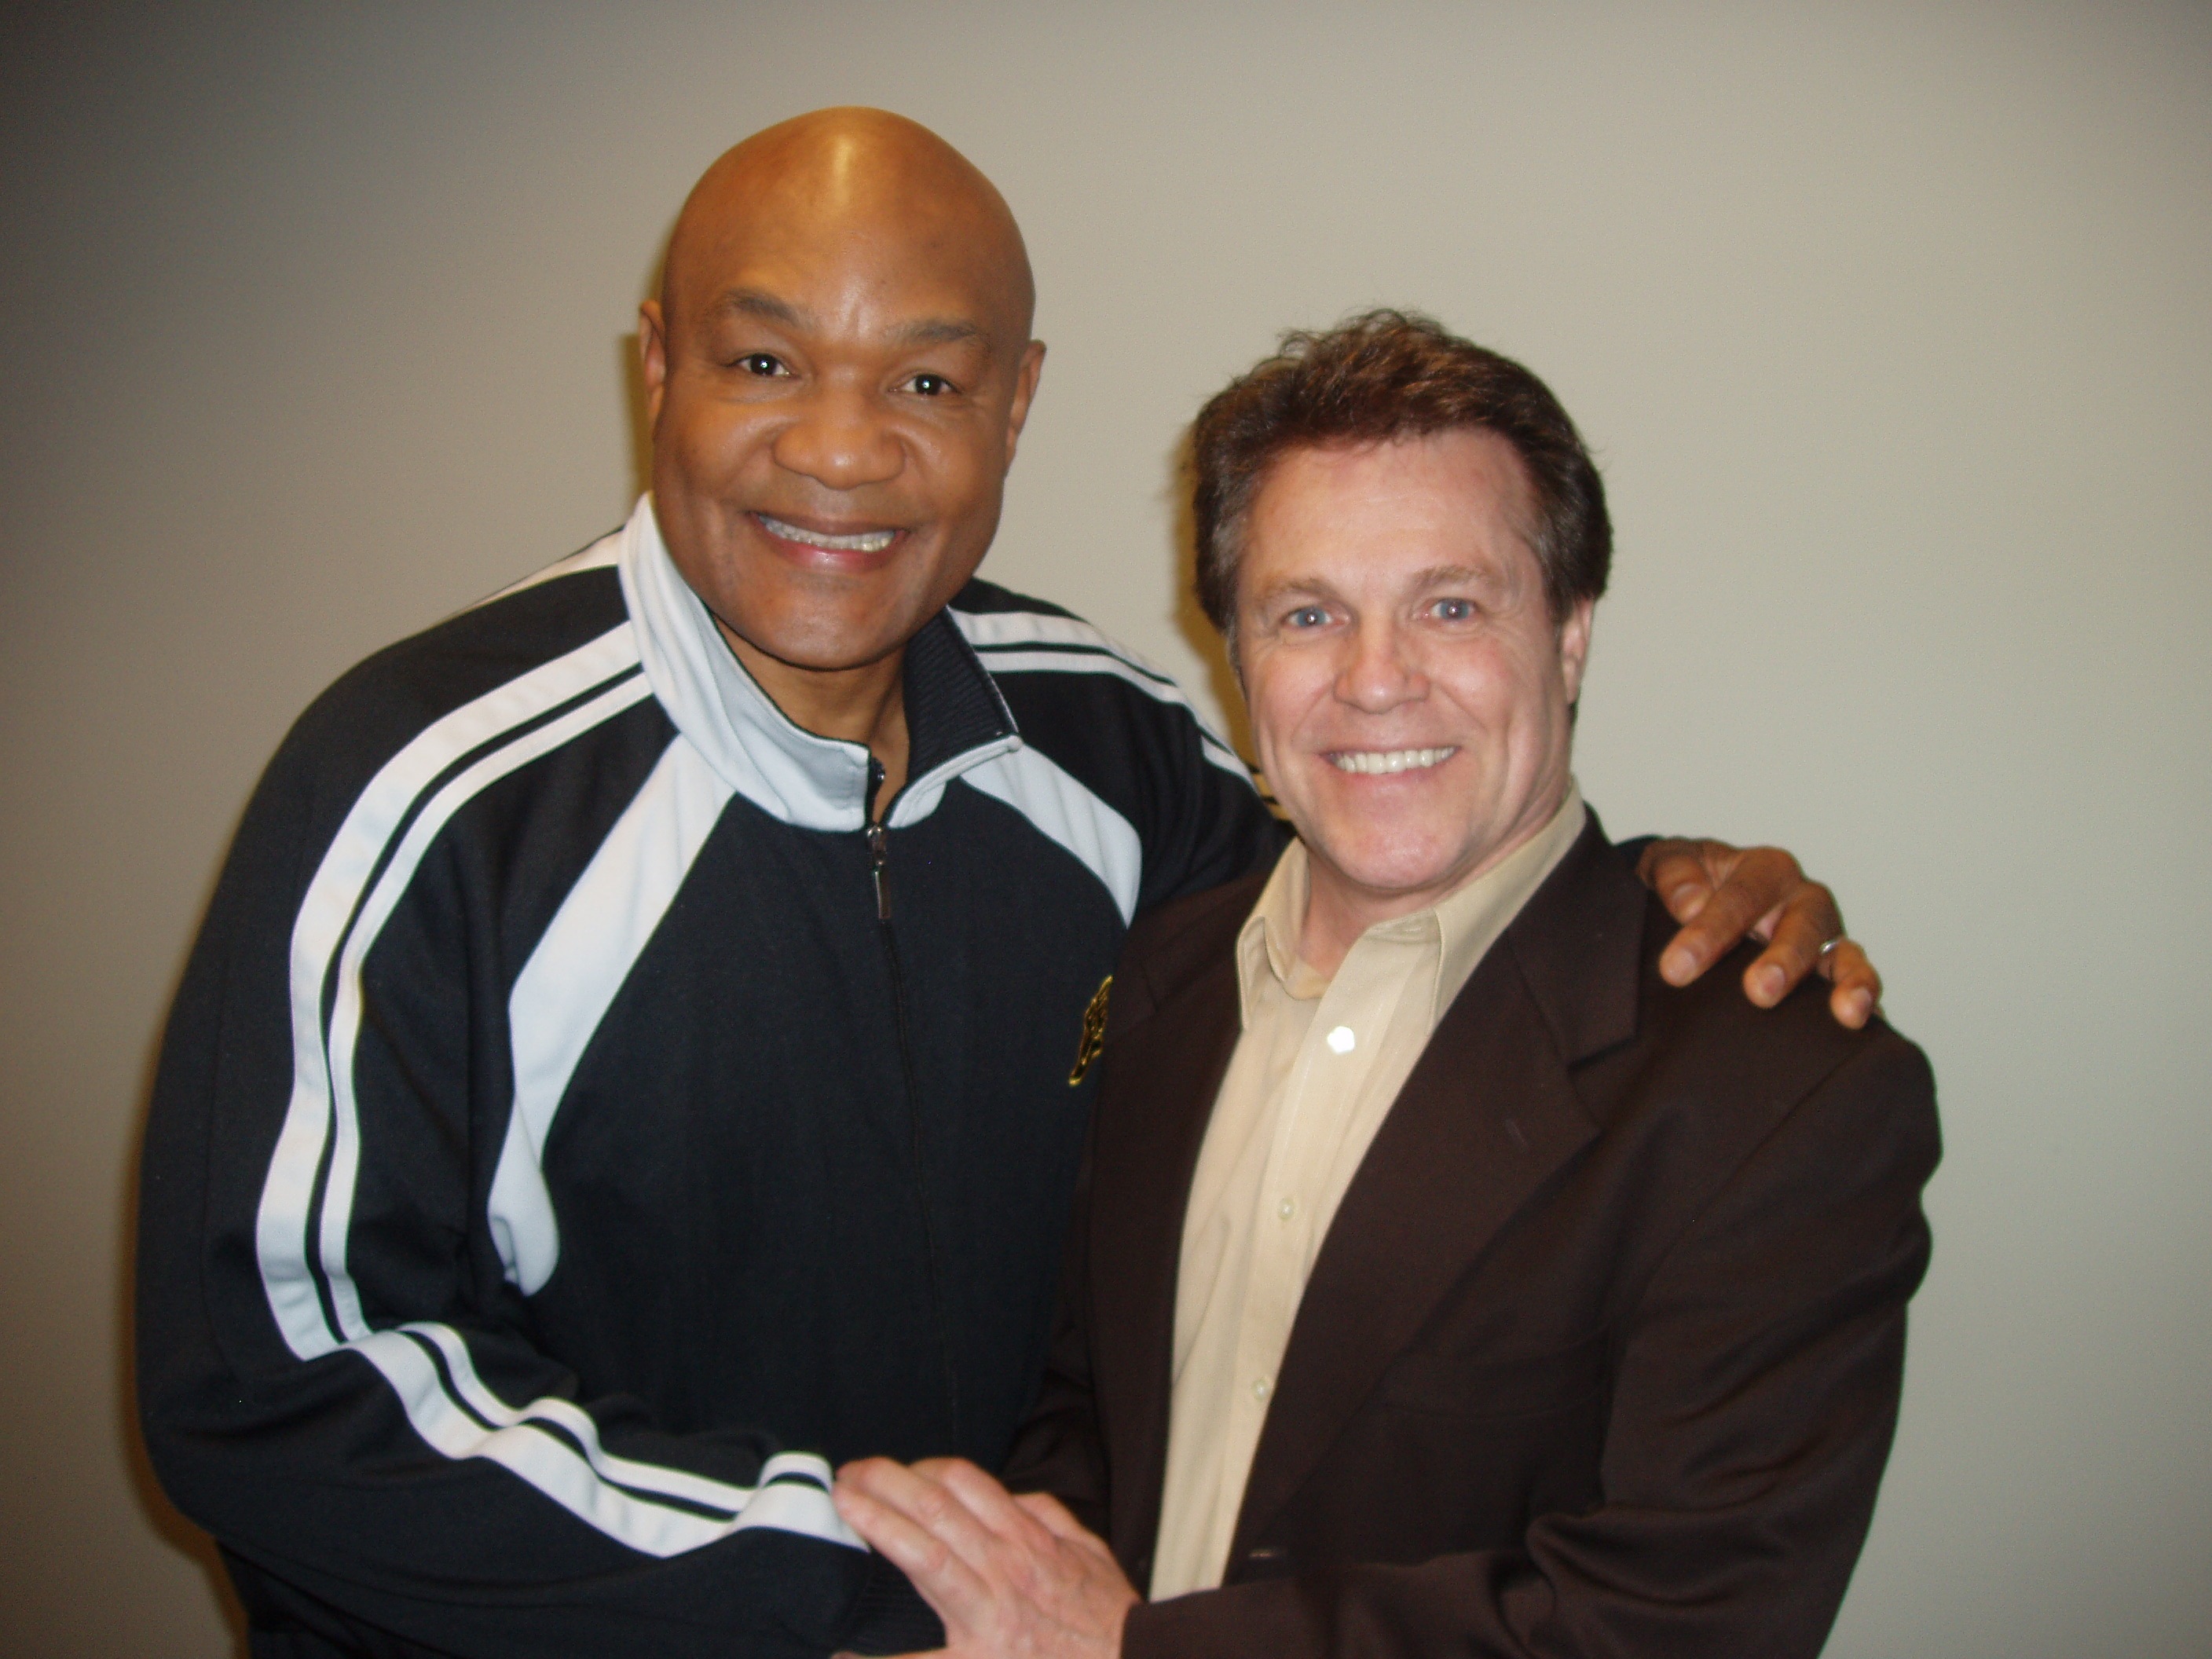 George Foreman and Dennis O'Neill